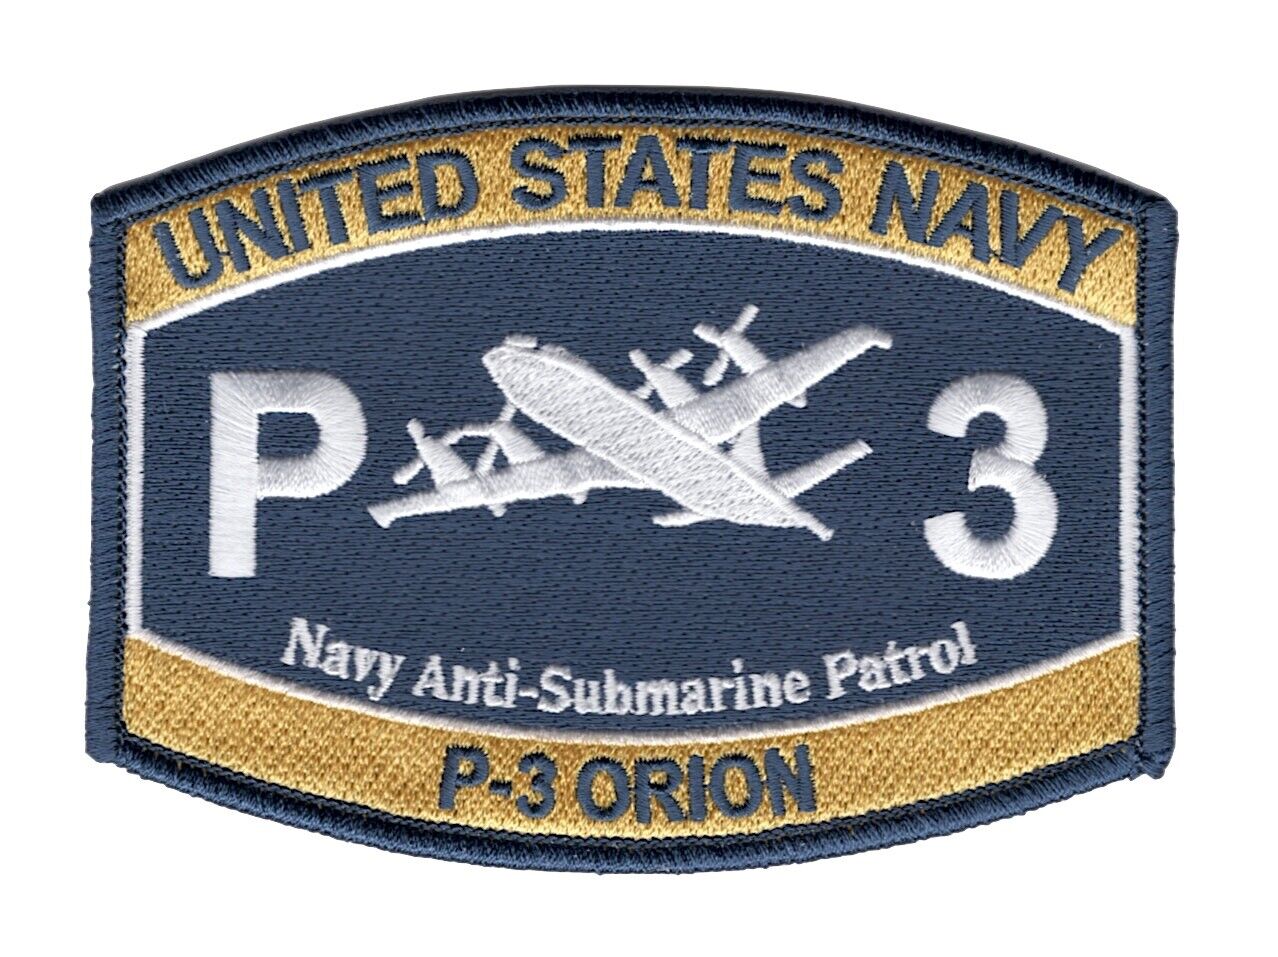 Aviation Rating P-3 Orion Navy Anti-Submarine Patrol Patch Rating